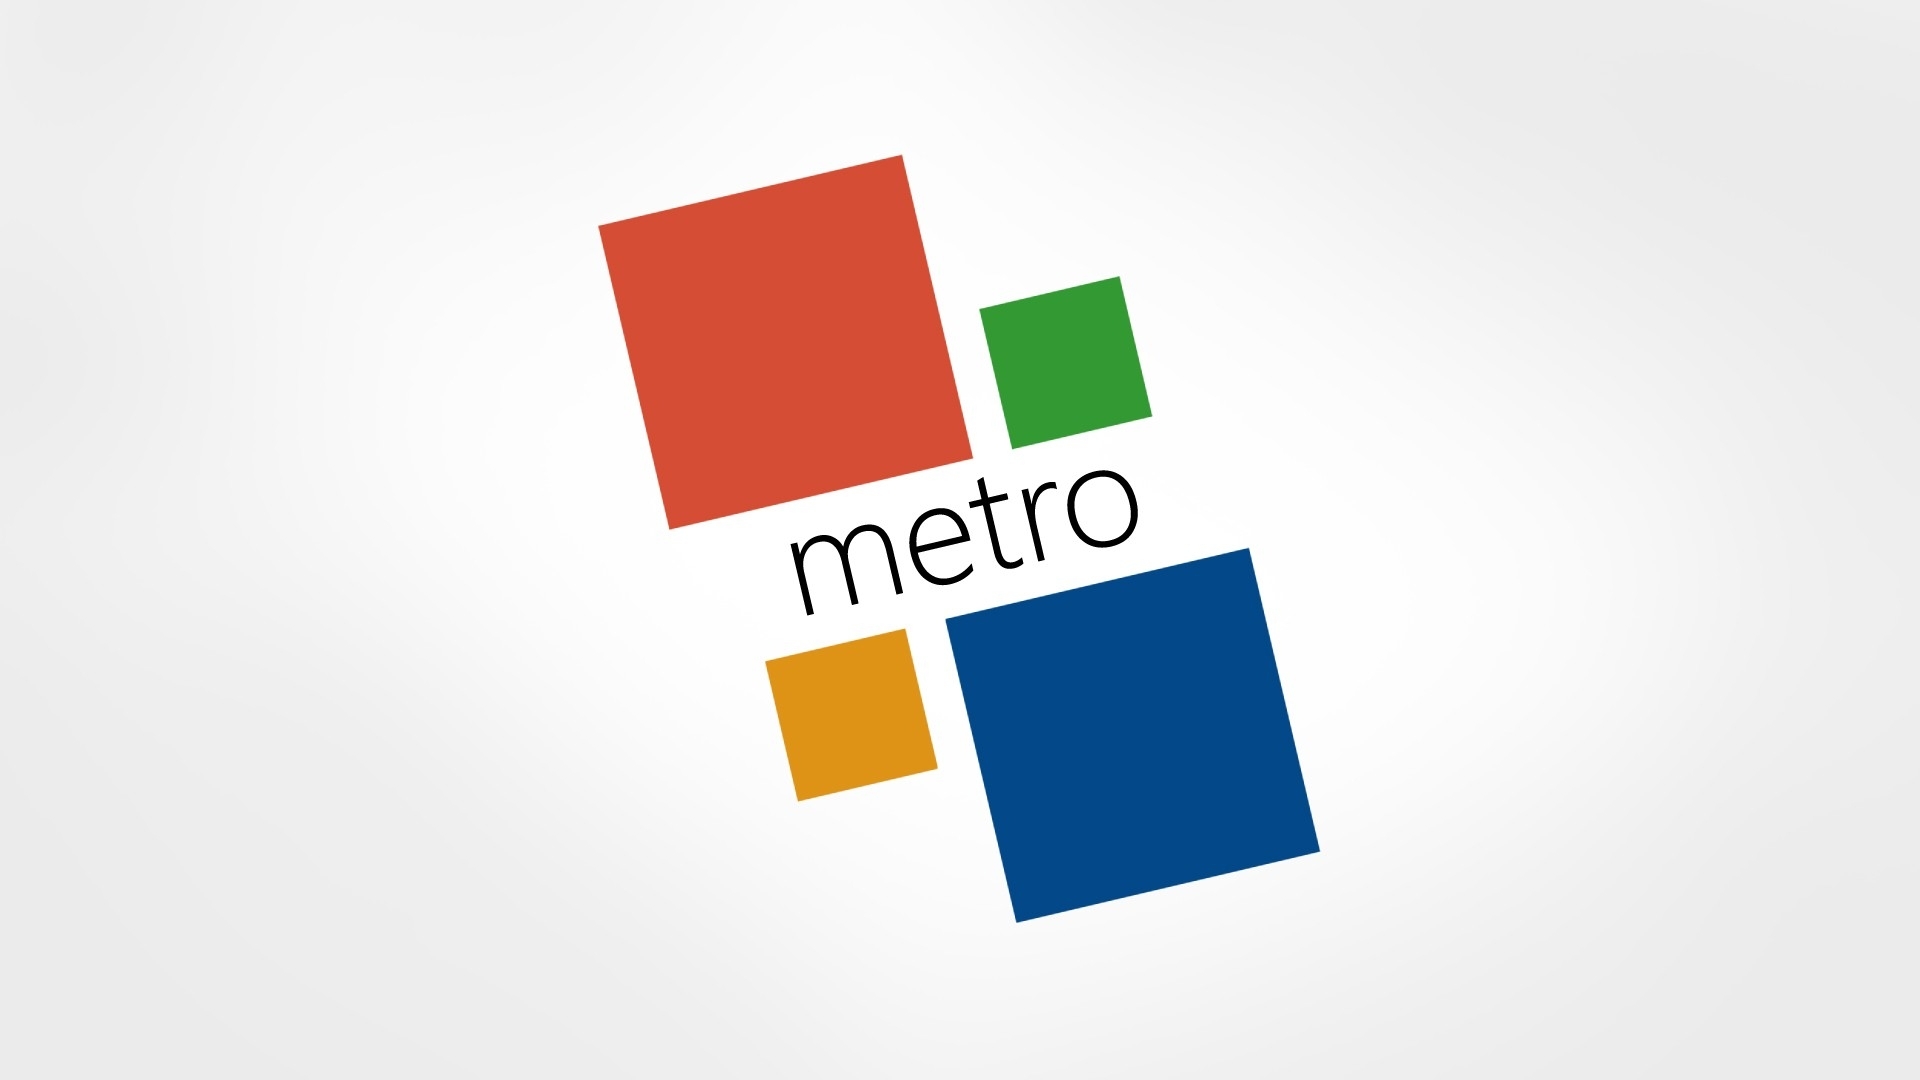 Microsoft Windows 8 Metro   High Definition Wallpapers   HD wallpapers